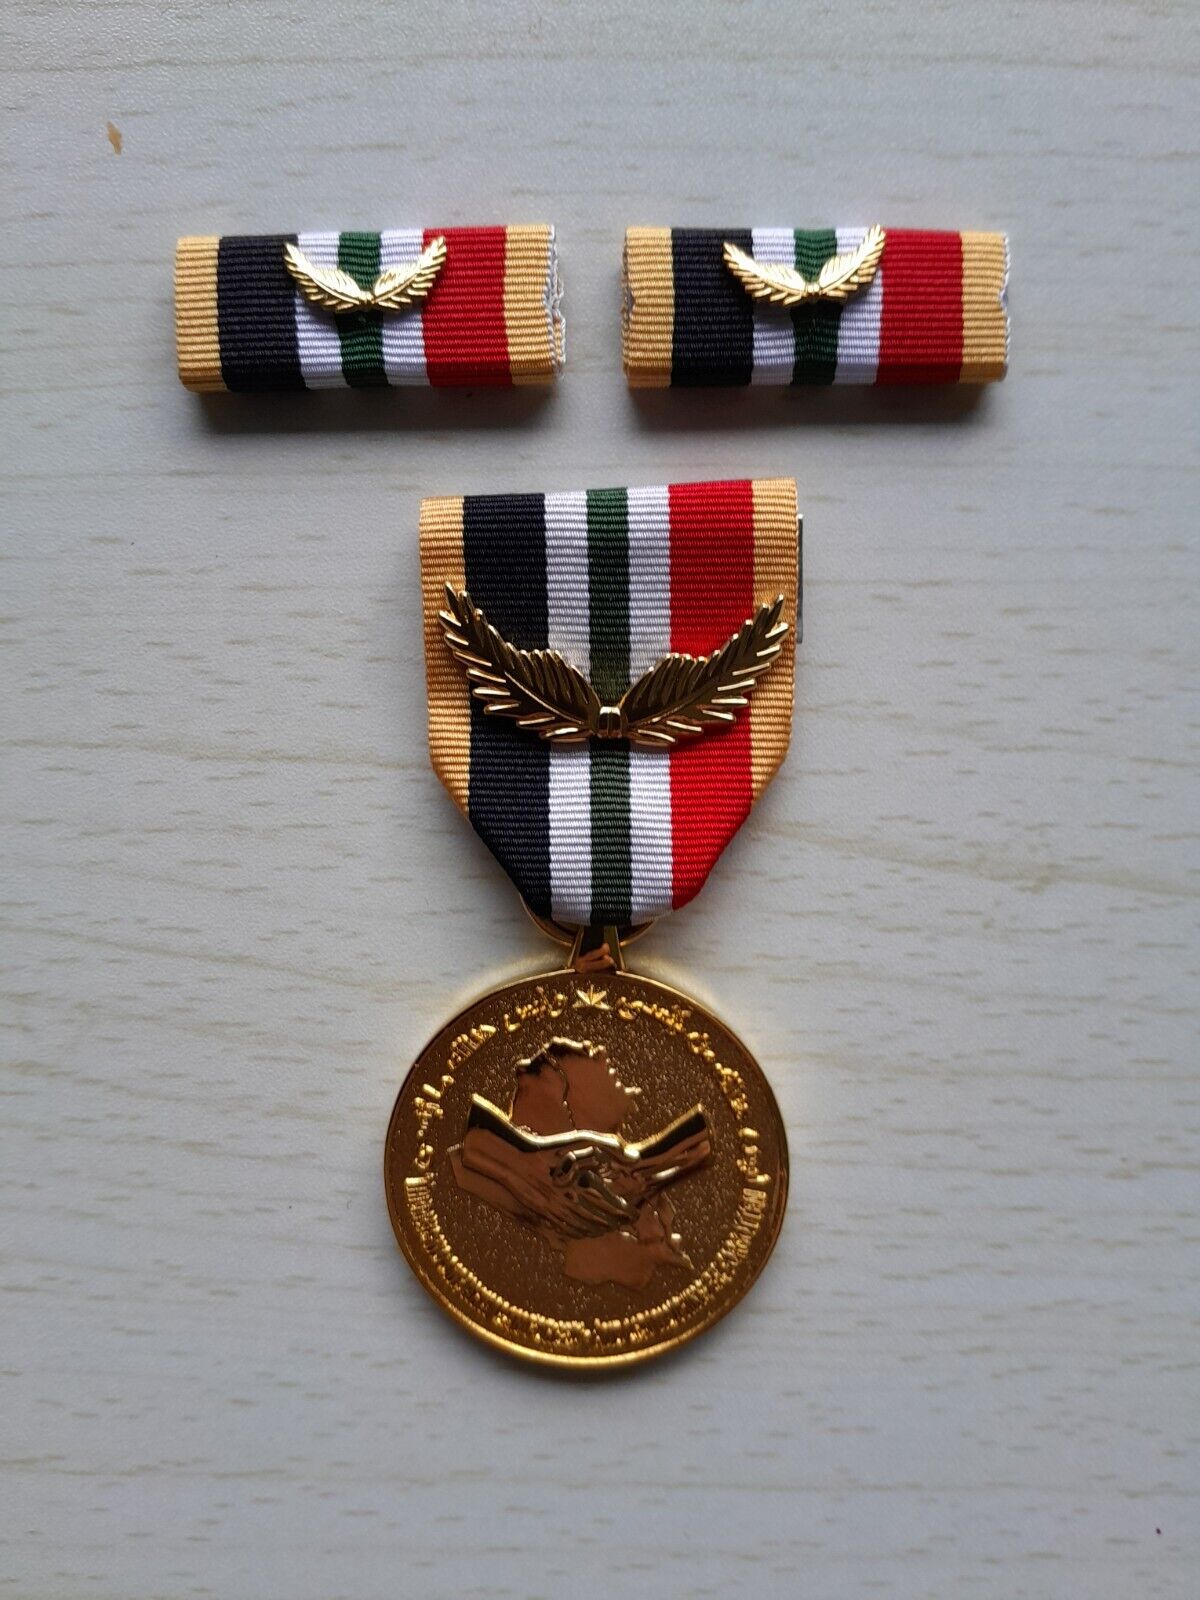 IRAQ COMMITMENT MEDAL WITH TWO SERVICE RIBBONS (MILITARY VERSION)